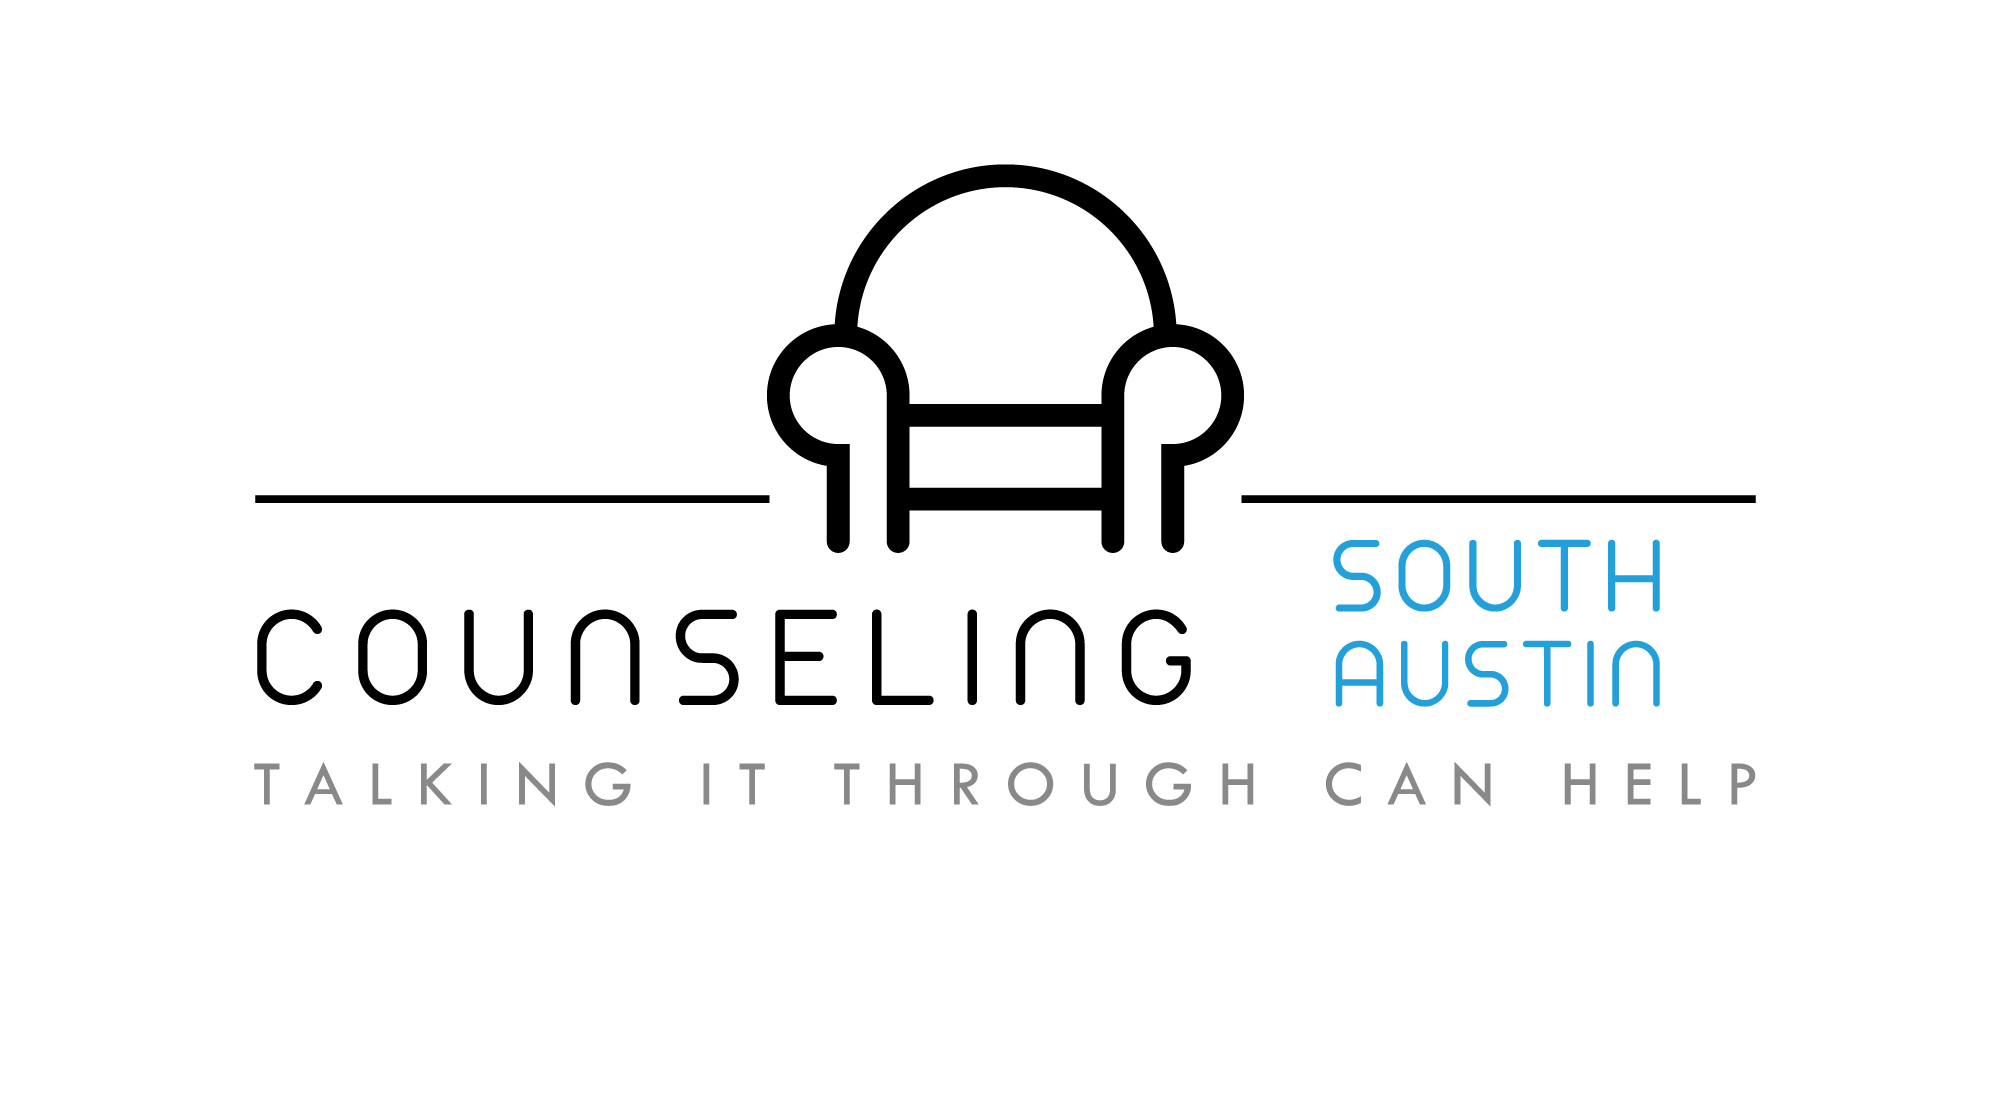 Counseling South Austin